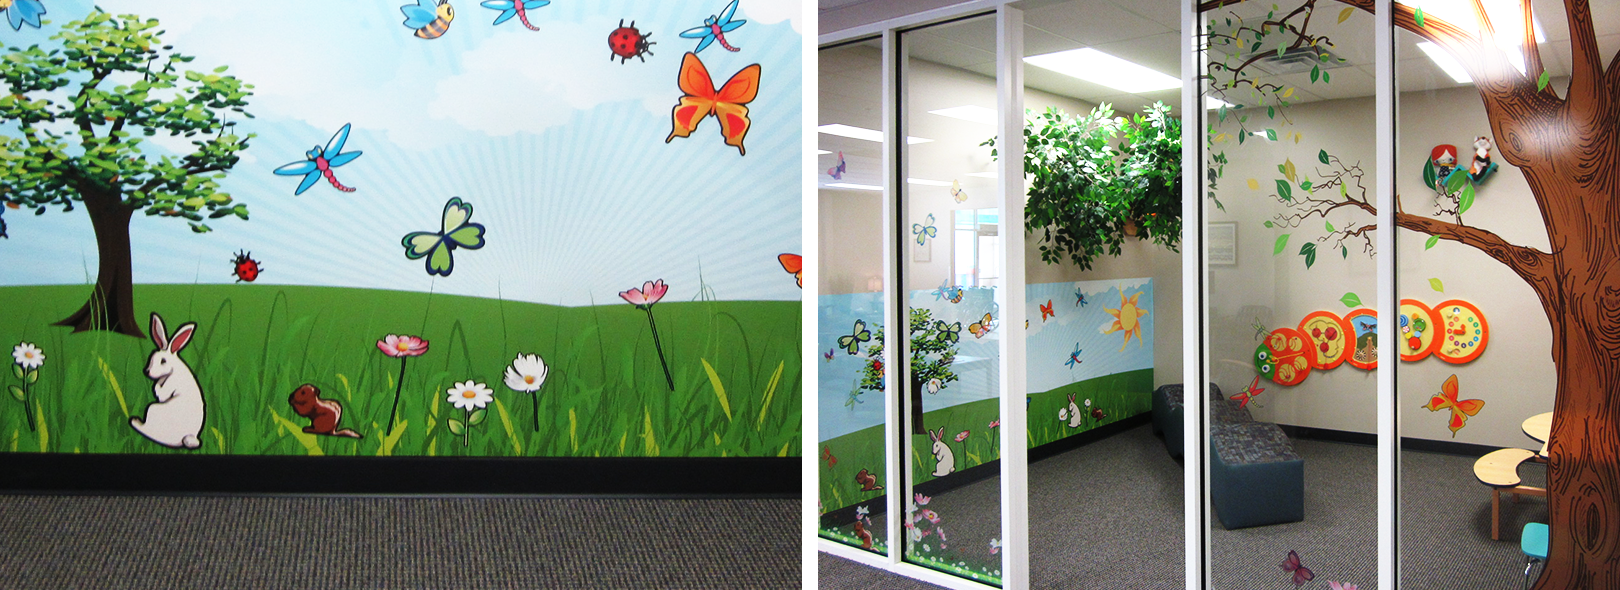 Magnetic Wall Covering at Beacon Children's Playroom